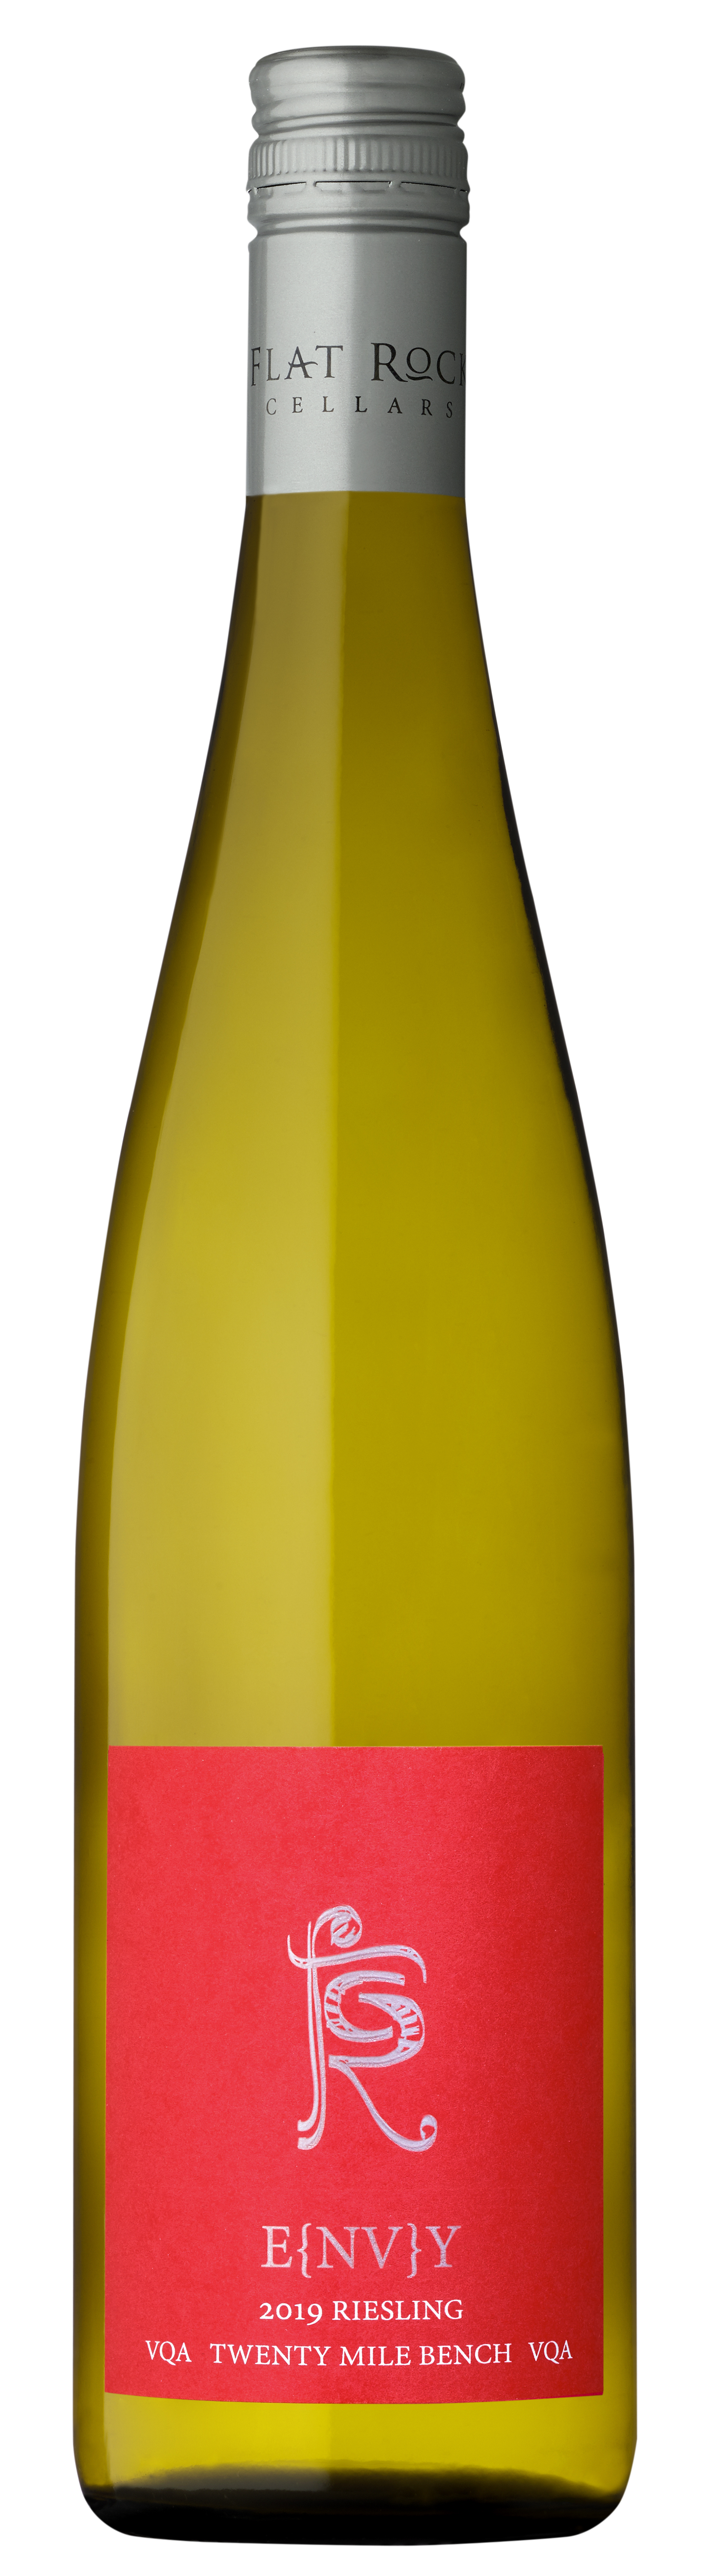 Product Image for 2019 E{NV}Y Riesling